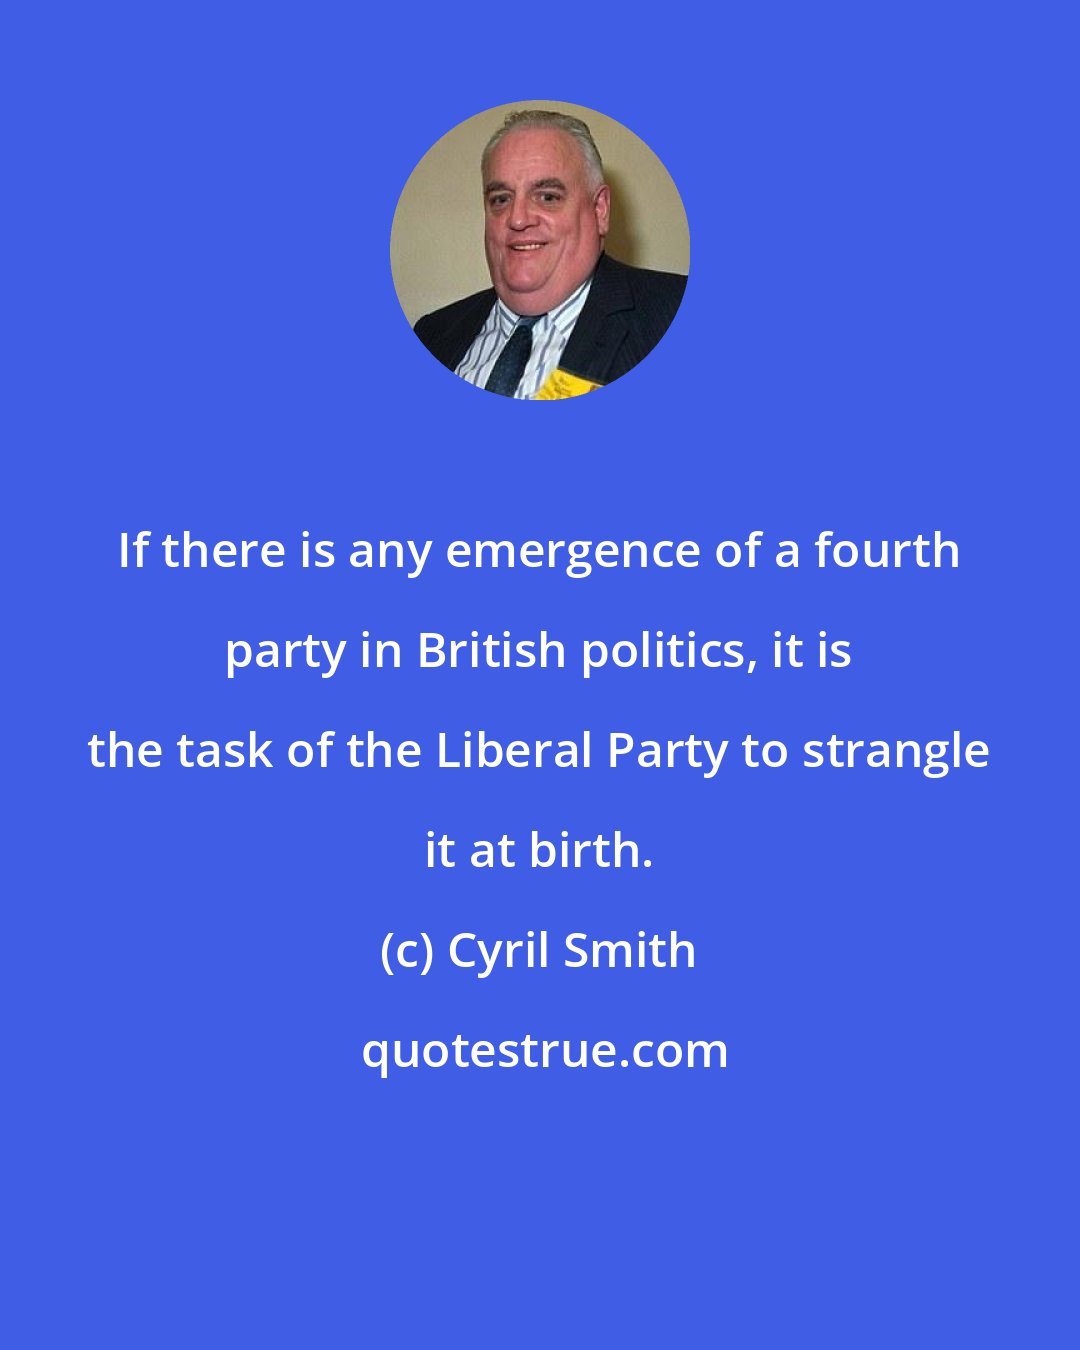 Cyril Smith: If there is any emergence of a fourth party in British politics, it is the task of the Liberal Party to strangle it at birth.